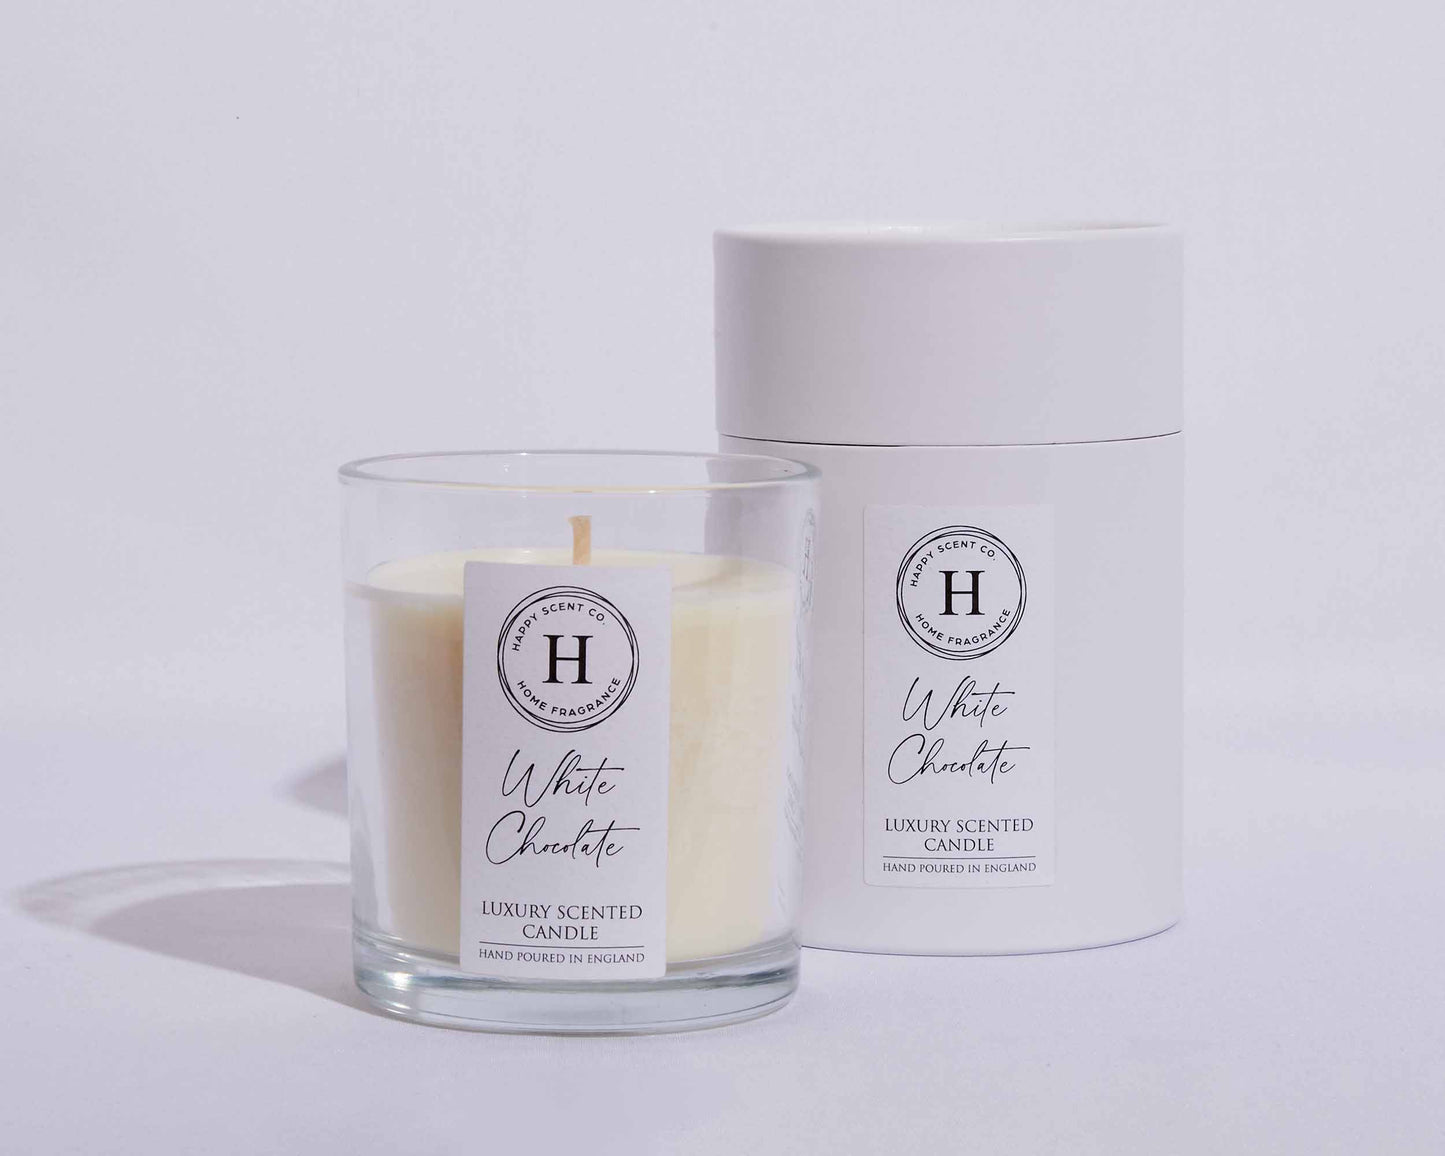 White Chocolate Luxury Scented Candle - By Happy Scent Co